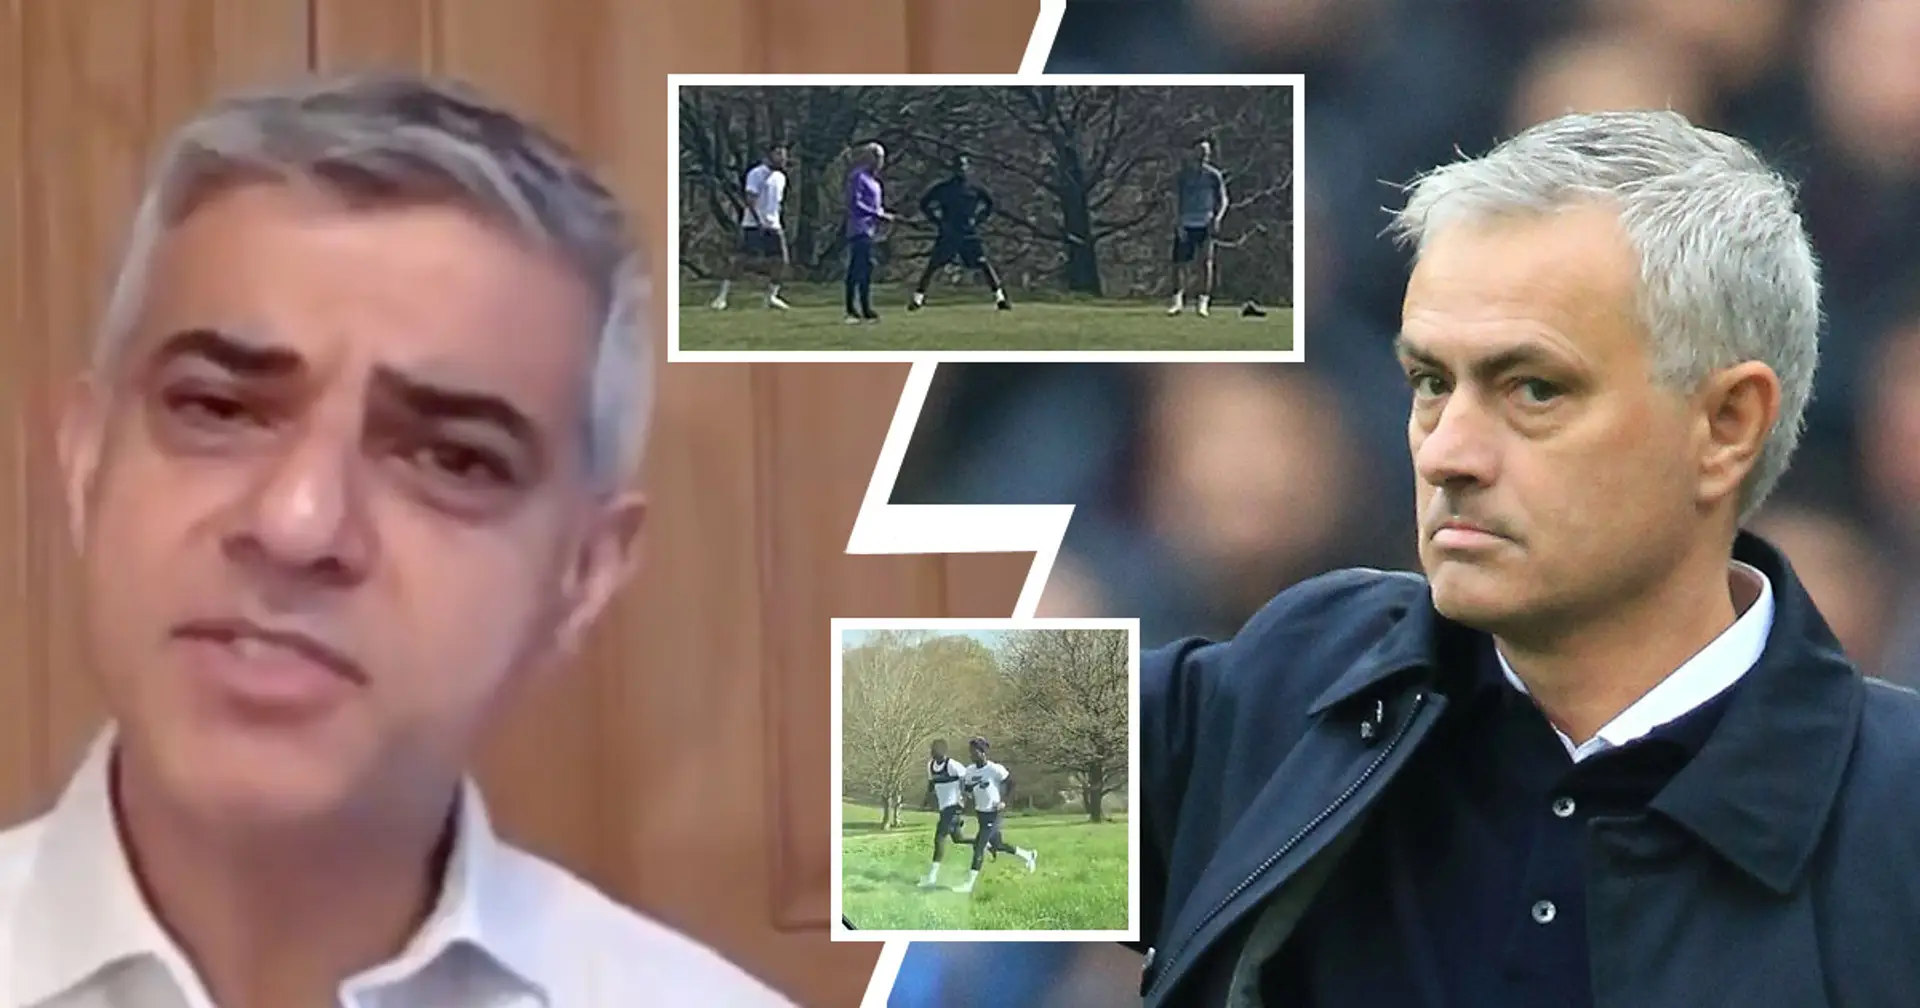 'You shouldn't be doing that': Mayor of London hits out at Tottenham as Spurs ingore lockdown as Mourinho and three players spotted training in park